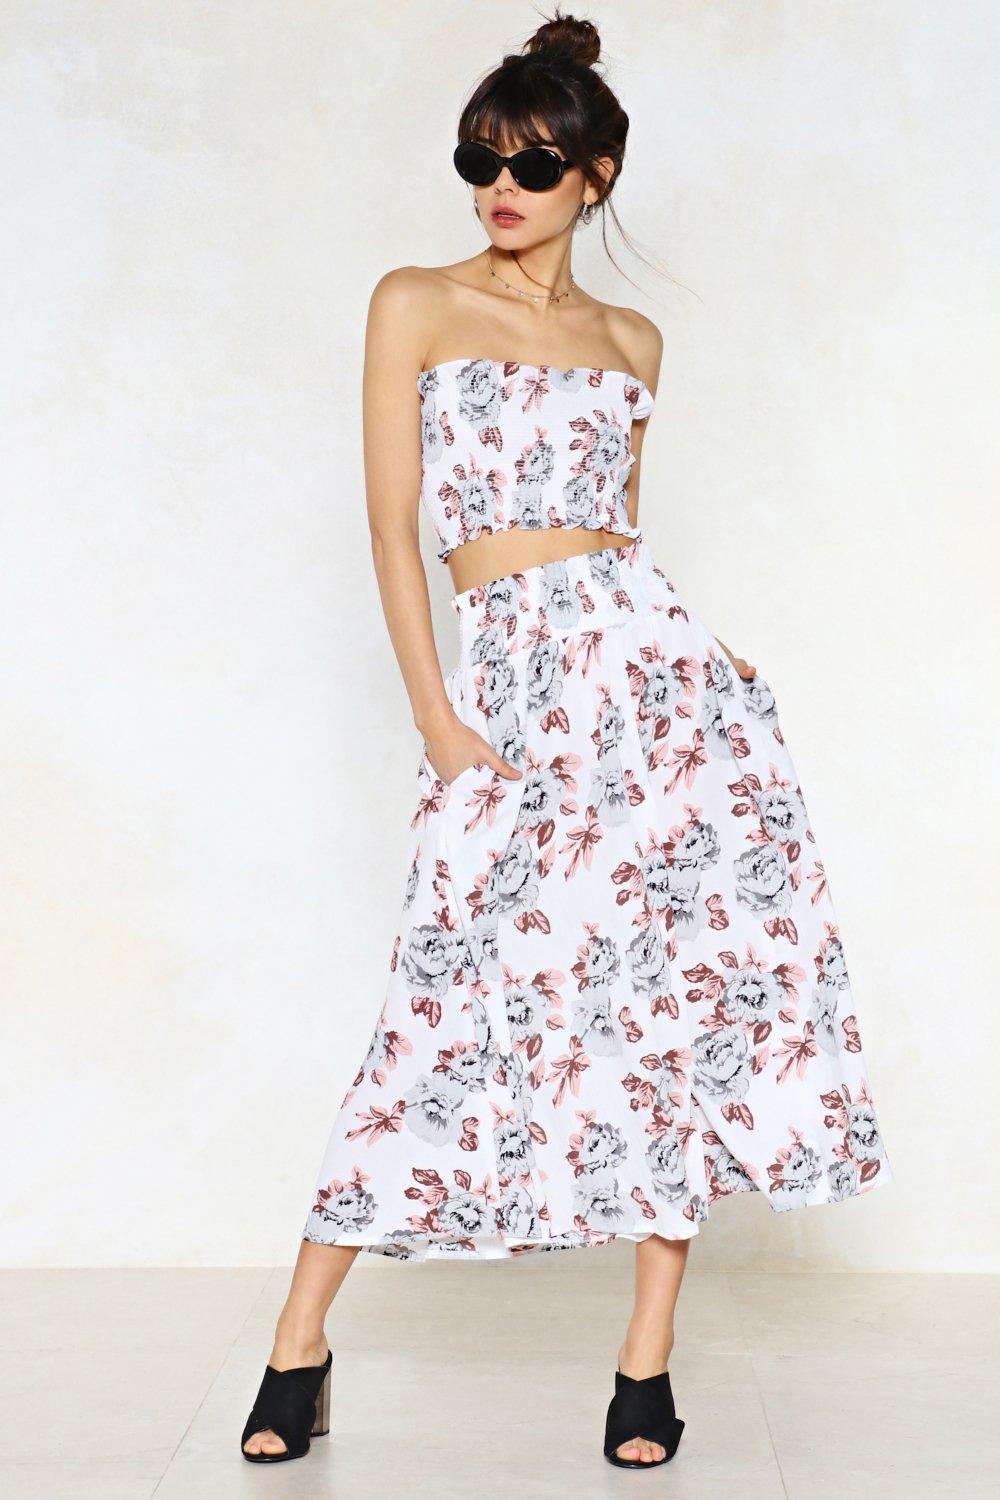 NASTY GAL Late Bloomer Floral Crop Top and Skirt Set